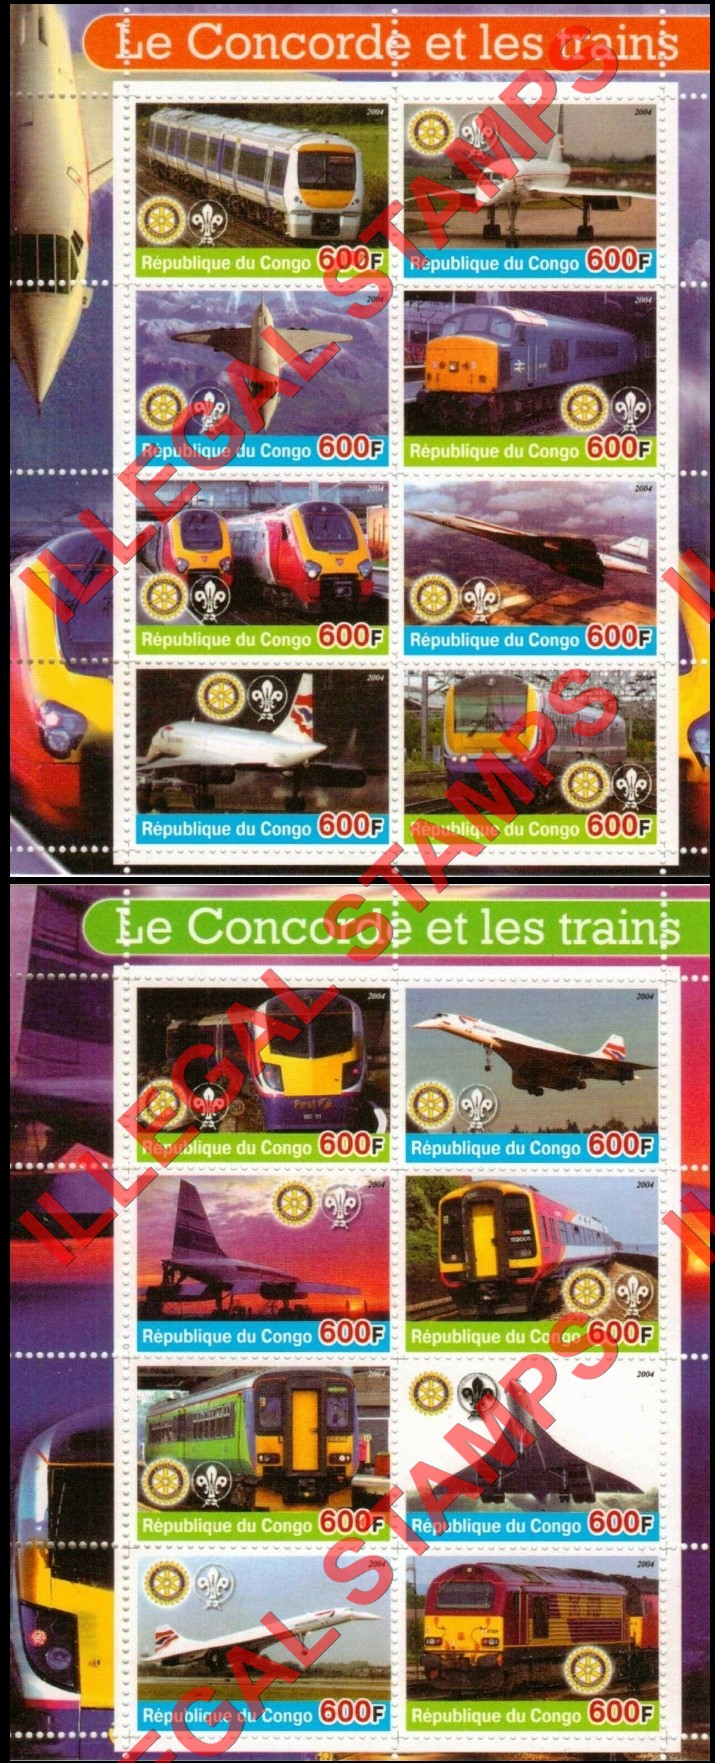 Congo Republic 2004 Concorde and Trains Illegal Stamp Souvenir Sheets of 8